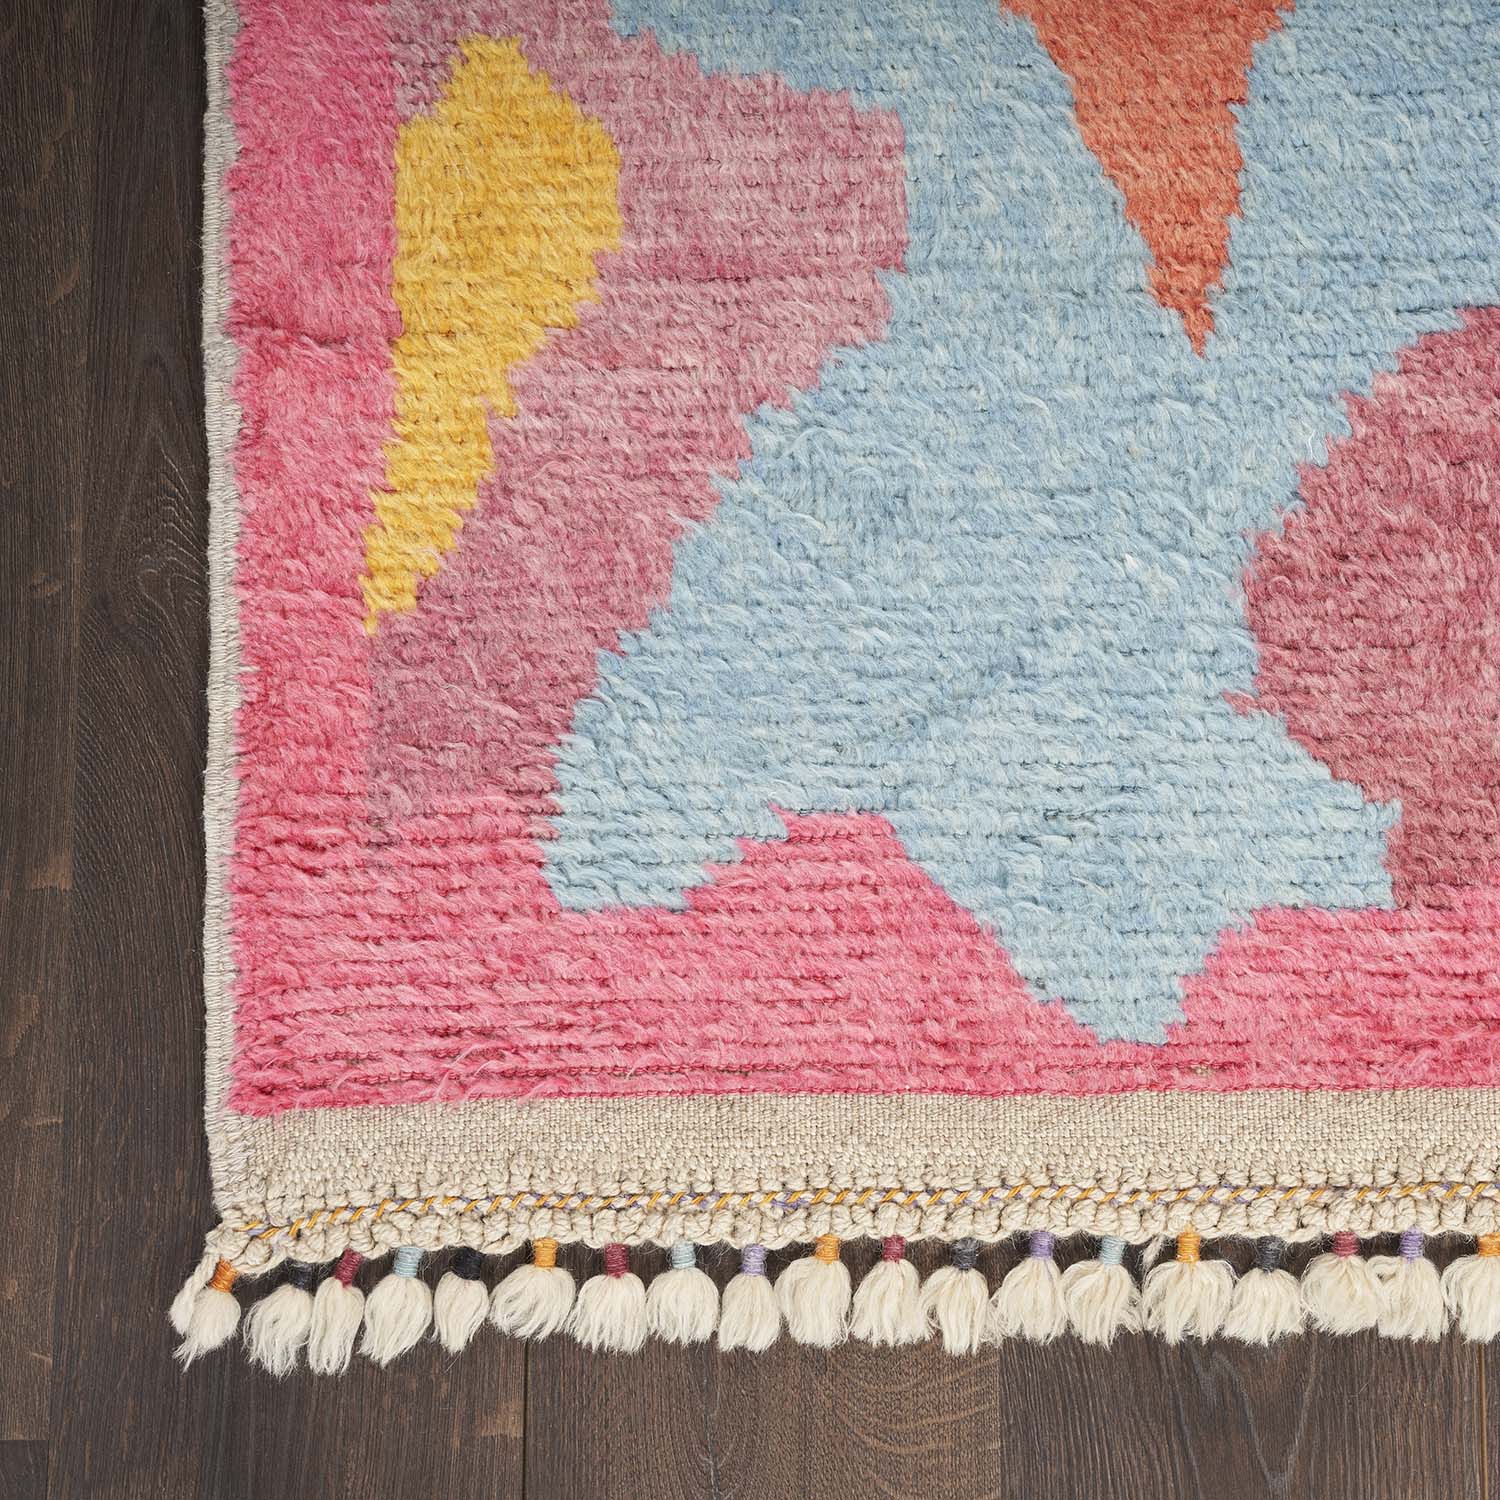 Vibrant, handcrafted area rug with geometric design and textured pile